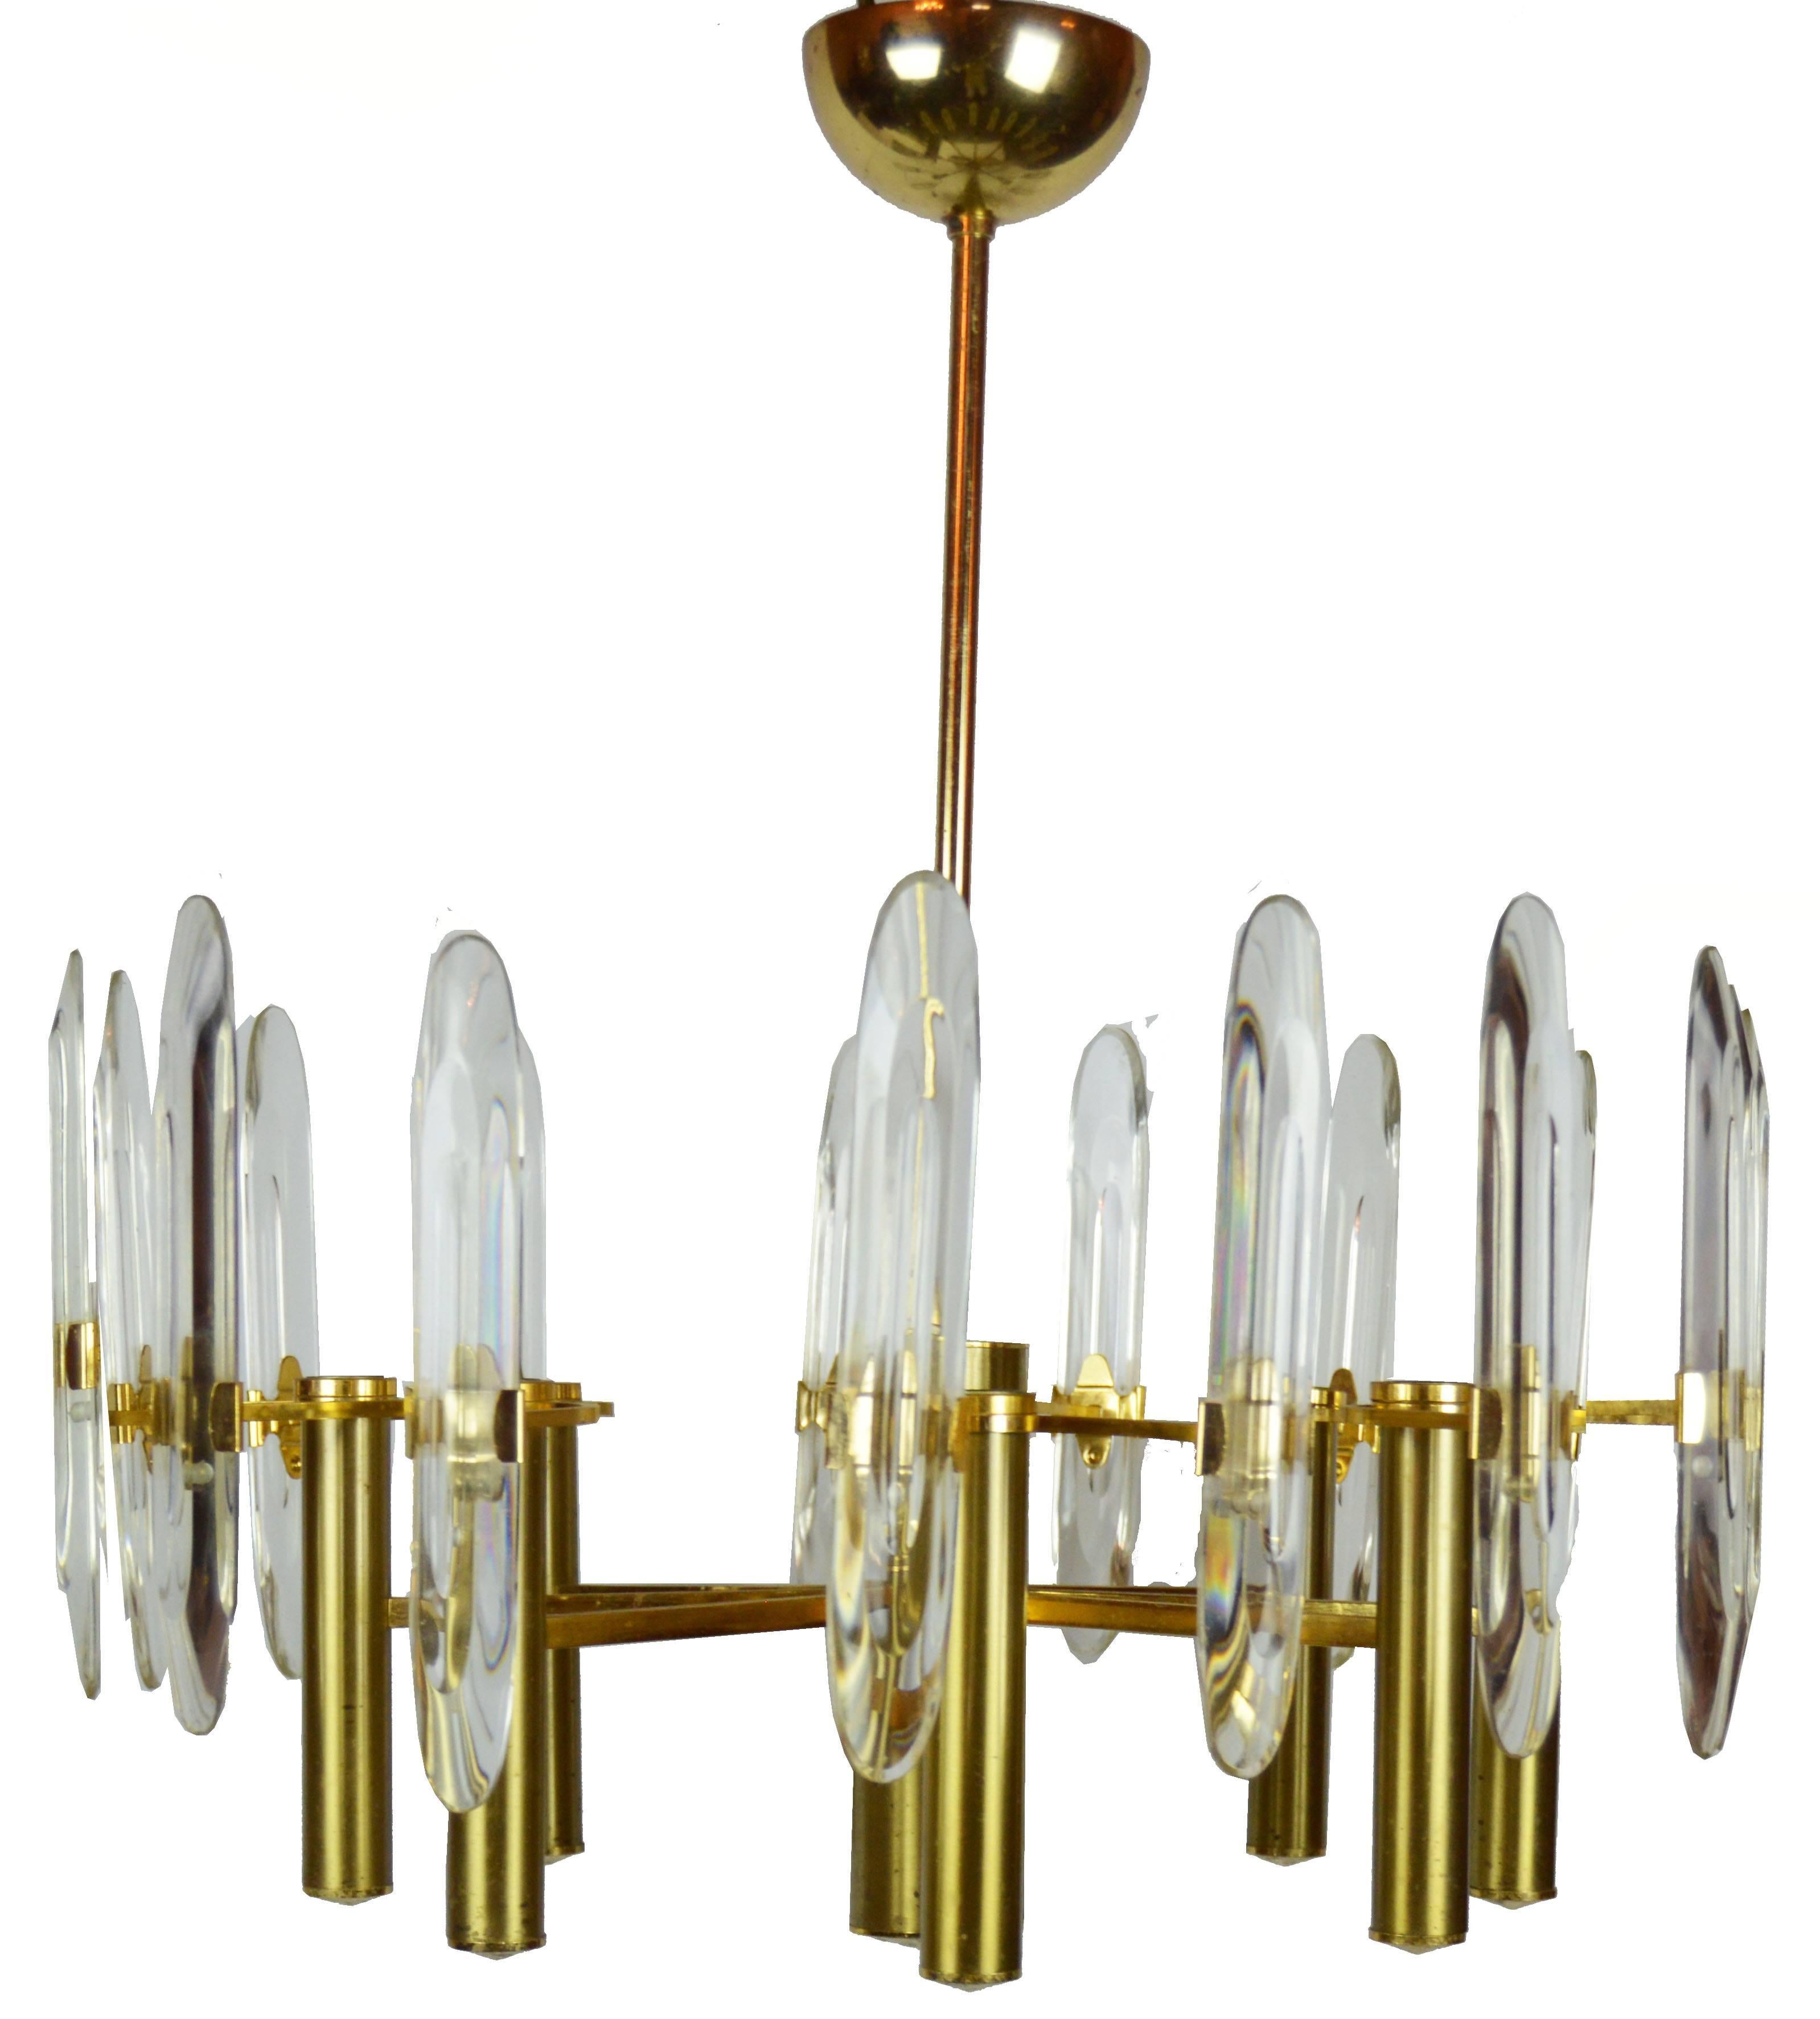 Gaetano Sciolari gold-plated eight-light chandelier.
US rewired and in working condition.
60 watts max per bulb.
Matching Sconces available.